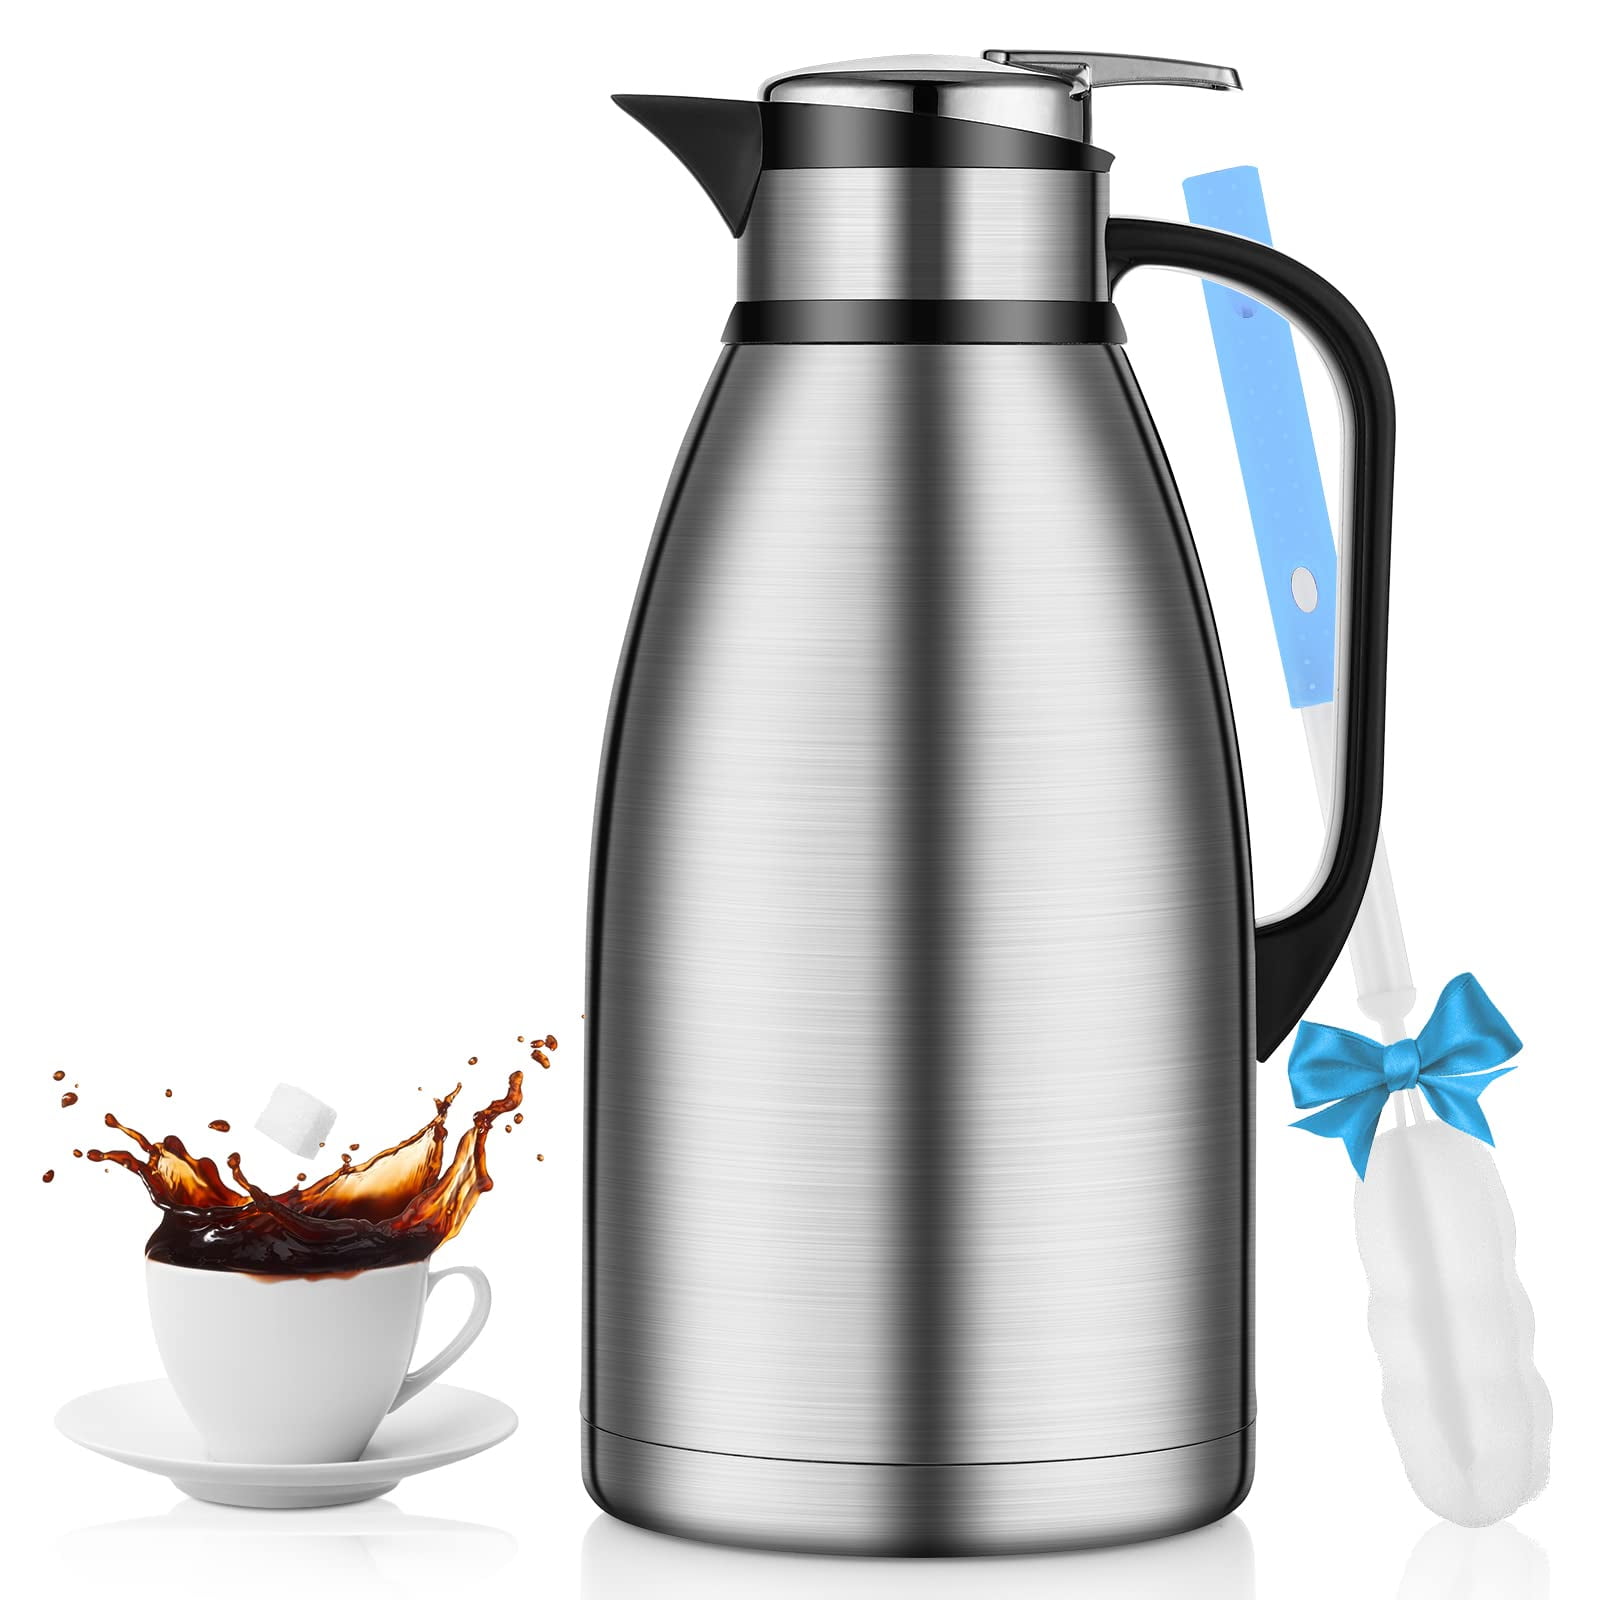 Large Vacuum Insulated Thermal Carafe - Stainless Steel Coffee